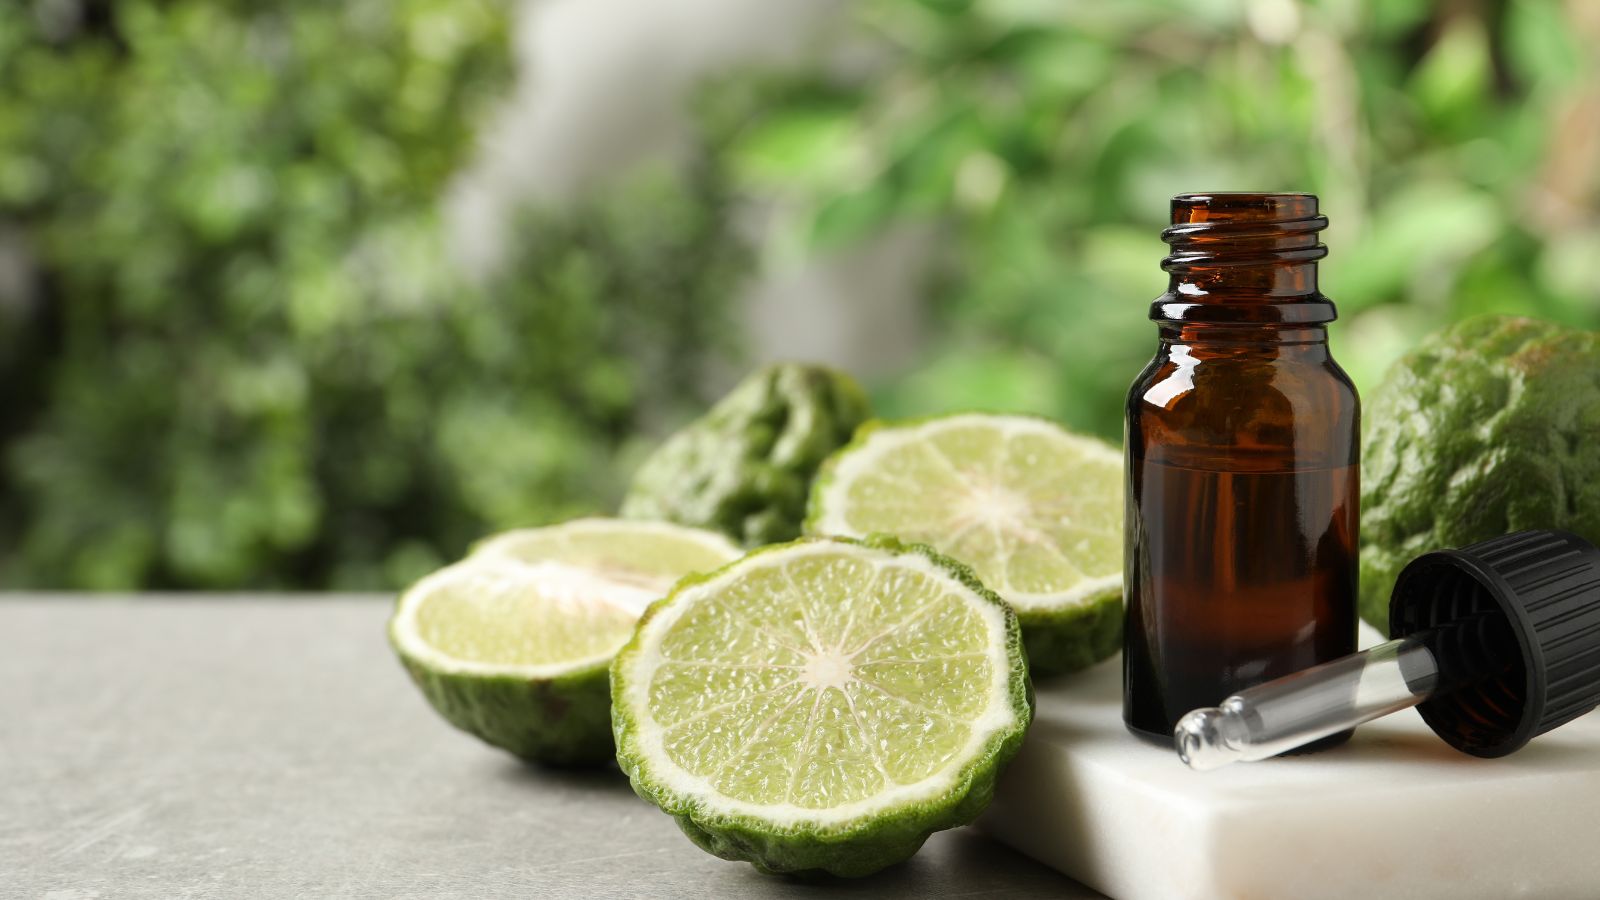 What Does Bergamot Essential Oil Smell Like